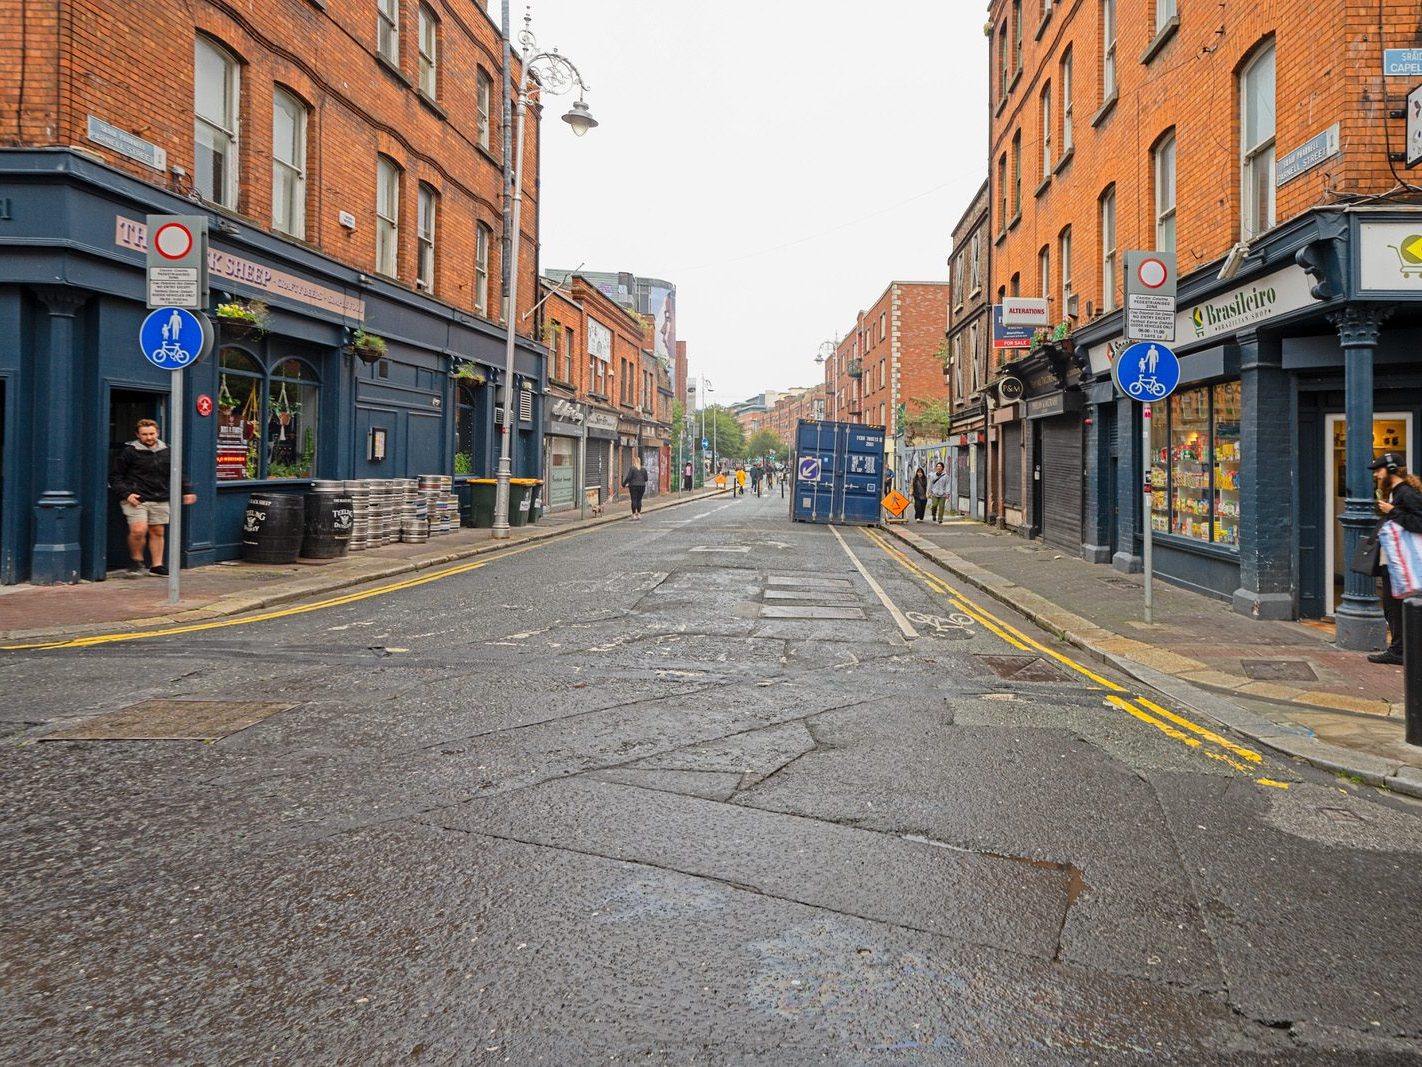 CAPEL STREET ON A DULL WET DAY [INTERIM CAPEL STREET IMPROVEMENT WORKS ARE NOW ONGOING] 011